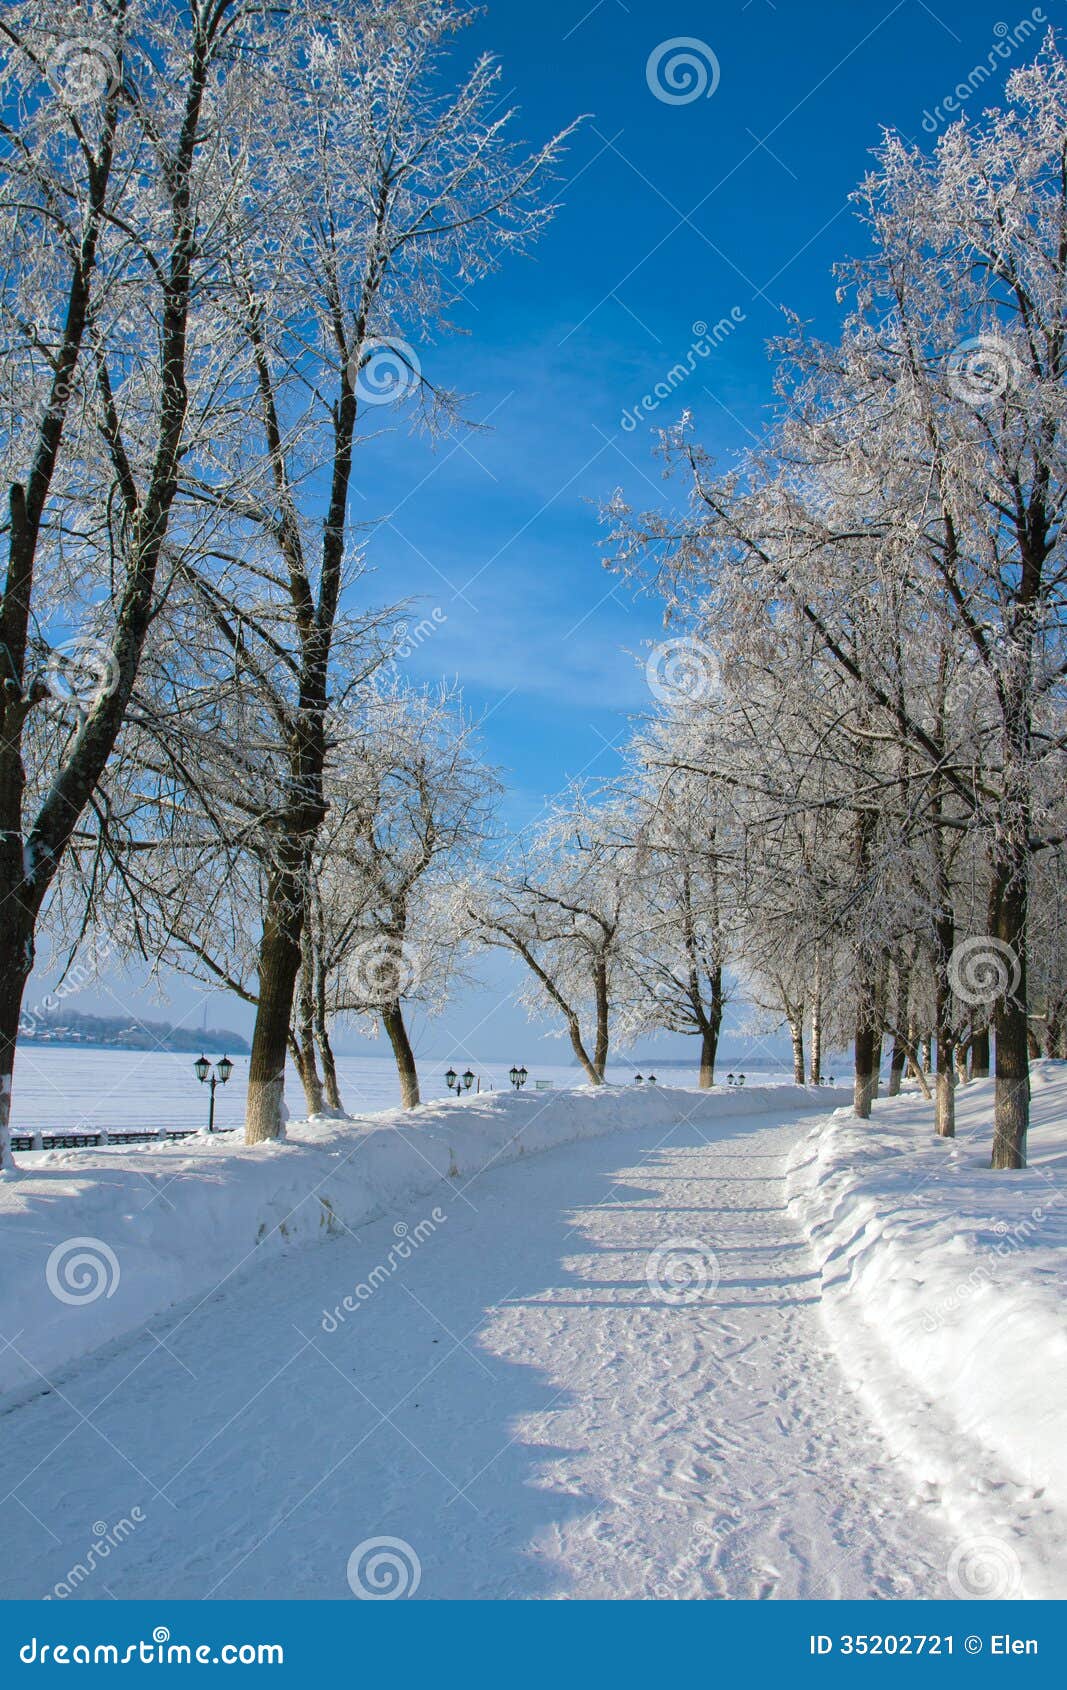 Winter season in city stock image. Image of town, winter - 35202721